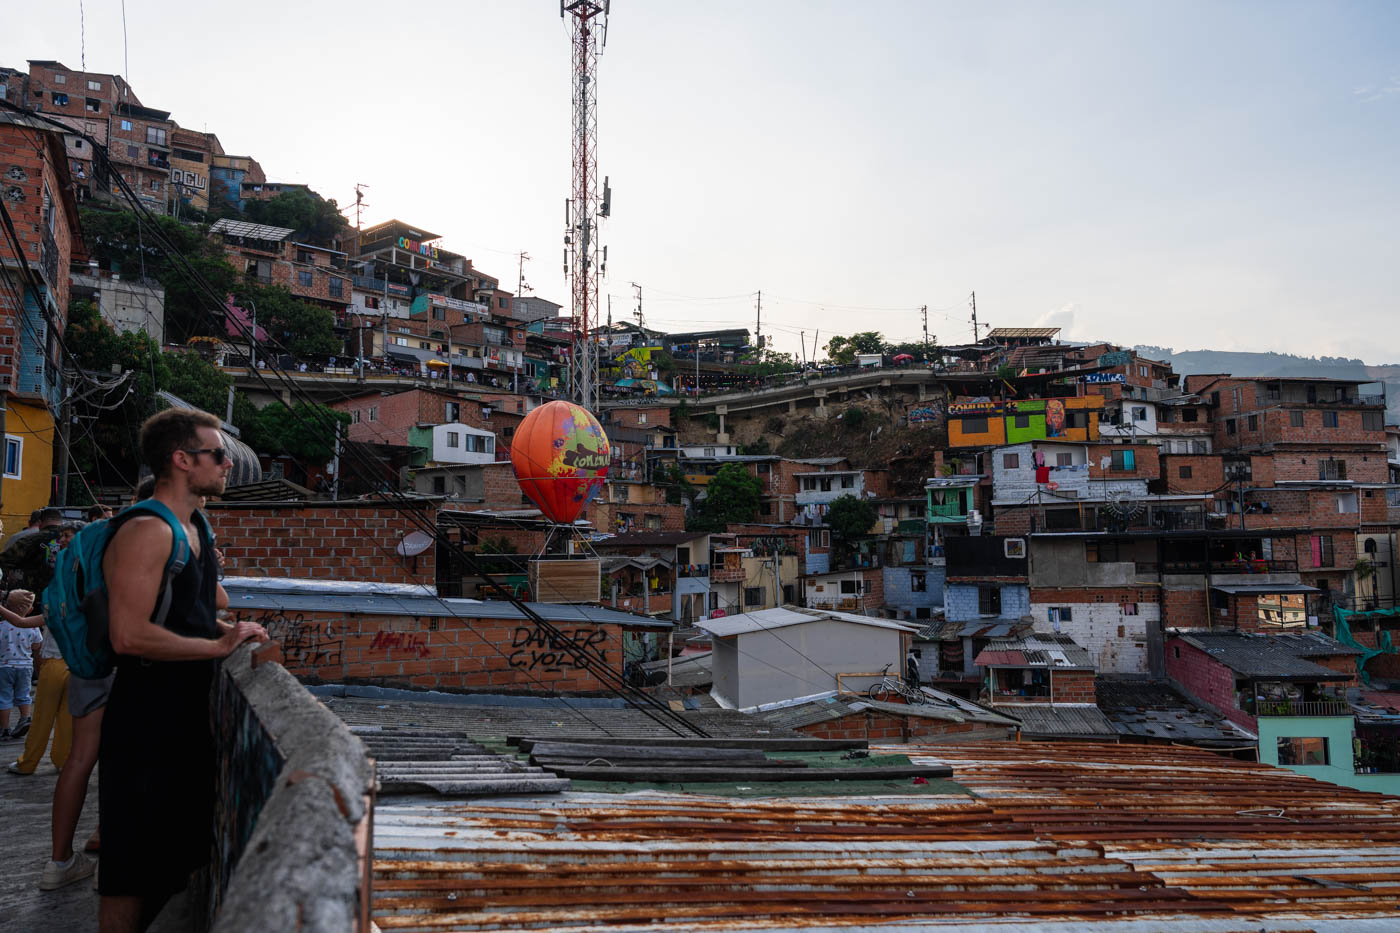 A tourist looking out over the favelas of Comuna 13 at sunset.